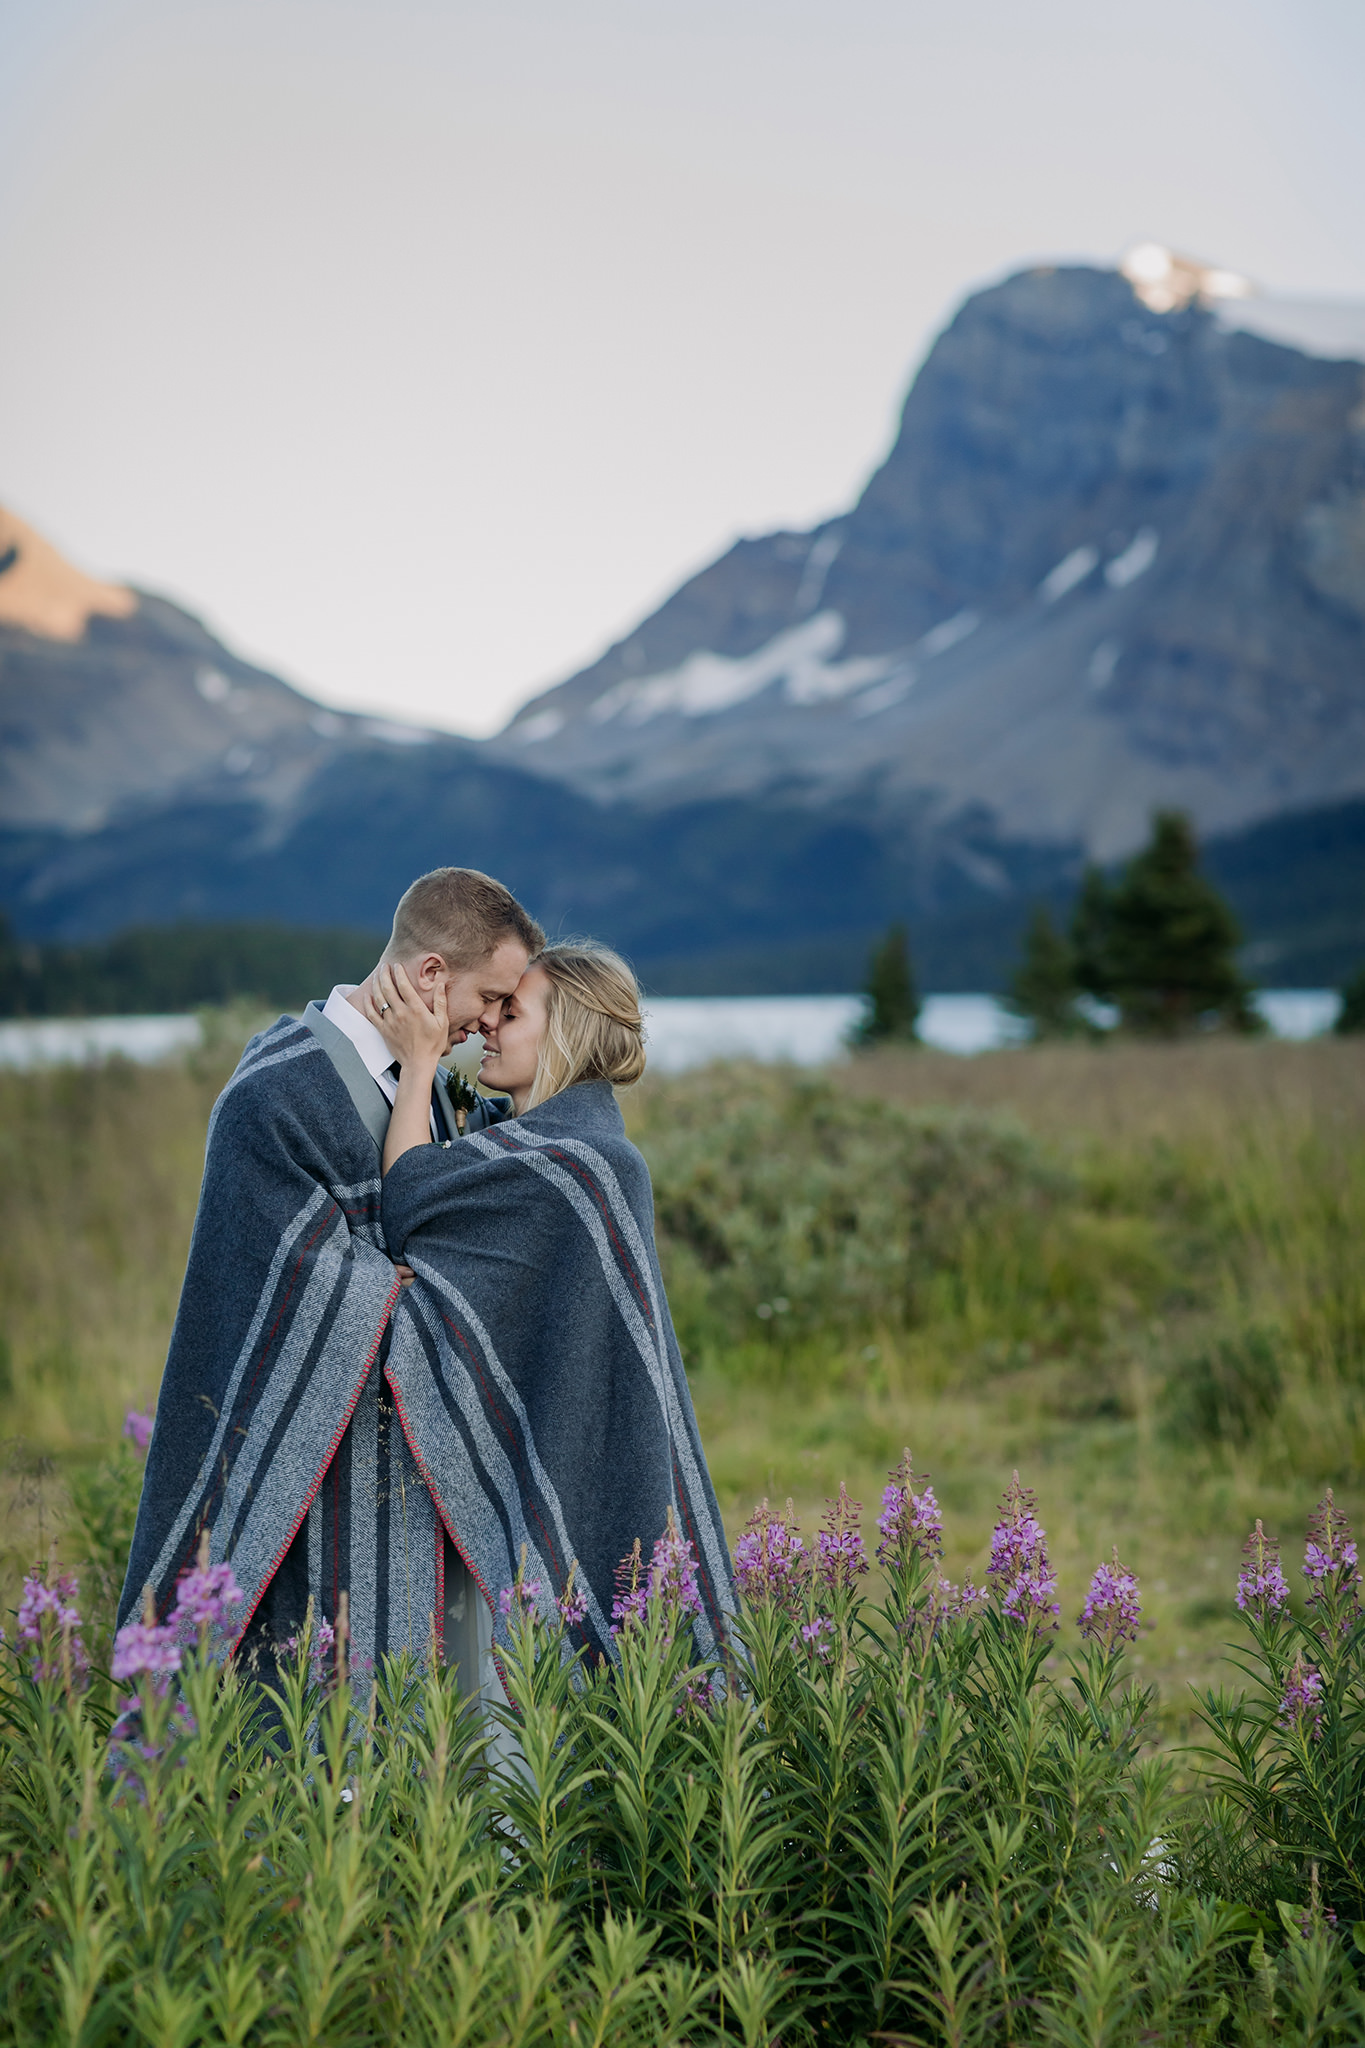 Exploring Icefields Parkway in Banff National Park on their wedding day. Summer mountain elopement at Bow Lake photographed by local wedding & elopement photographer ENV Photography 